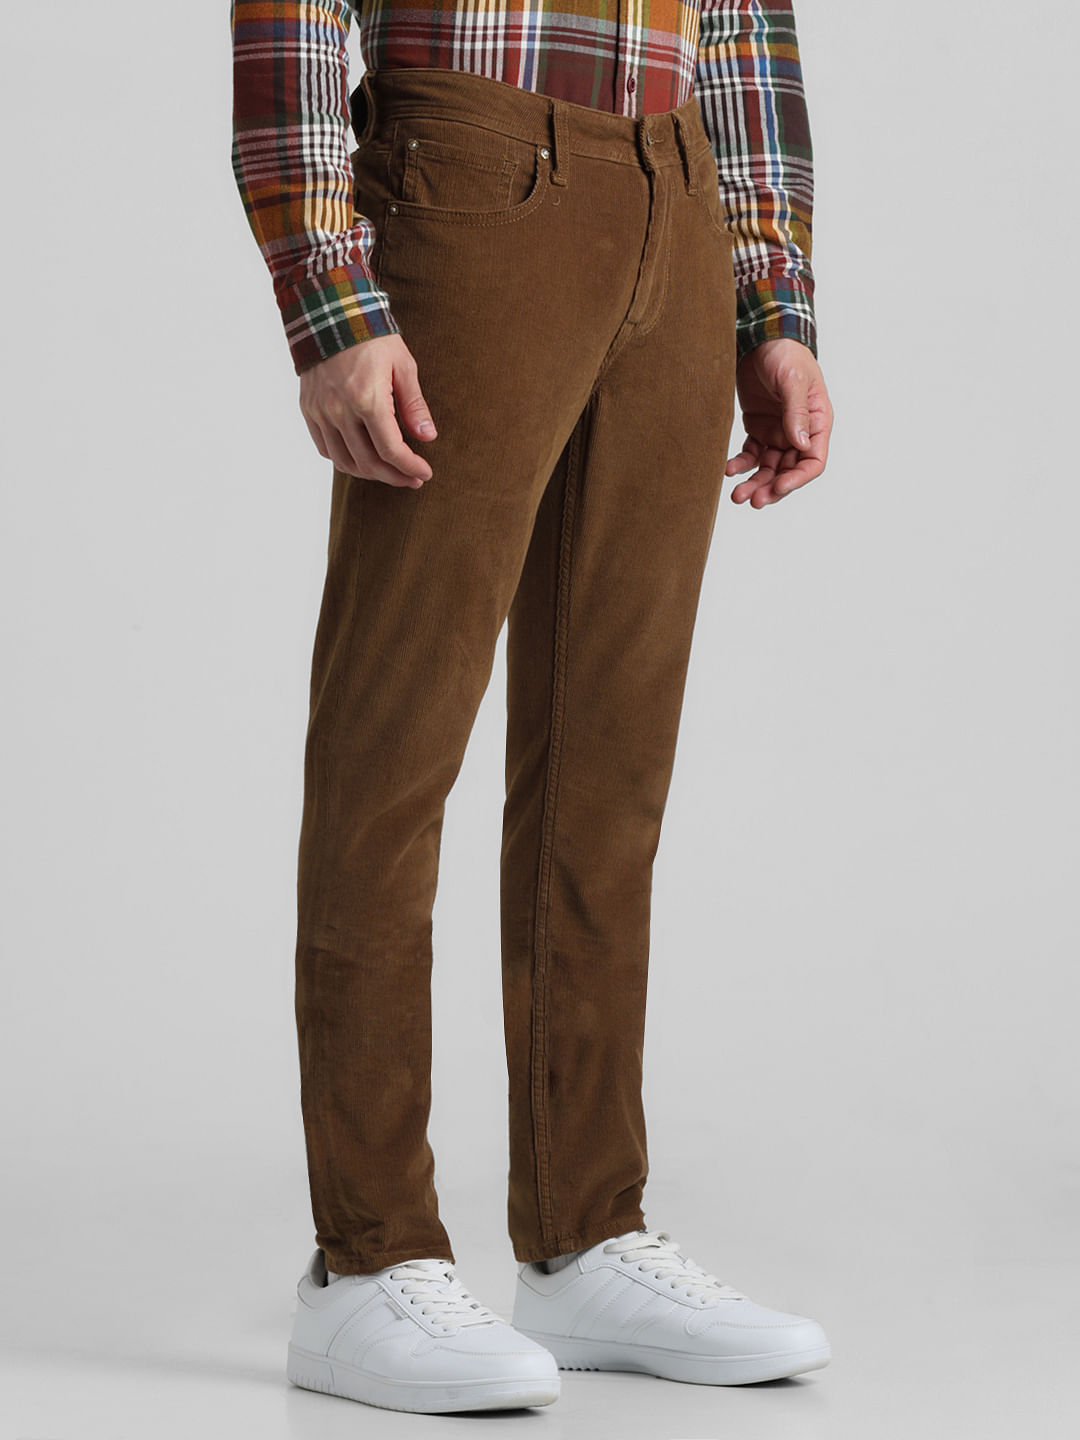 Casual Corduroy Men Pants ⎮ SWS Clothing and Accessories